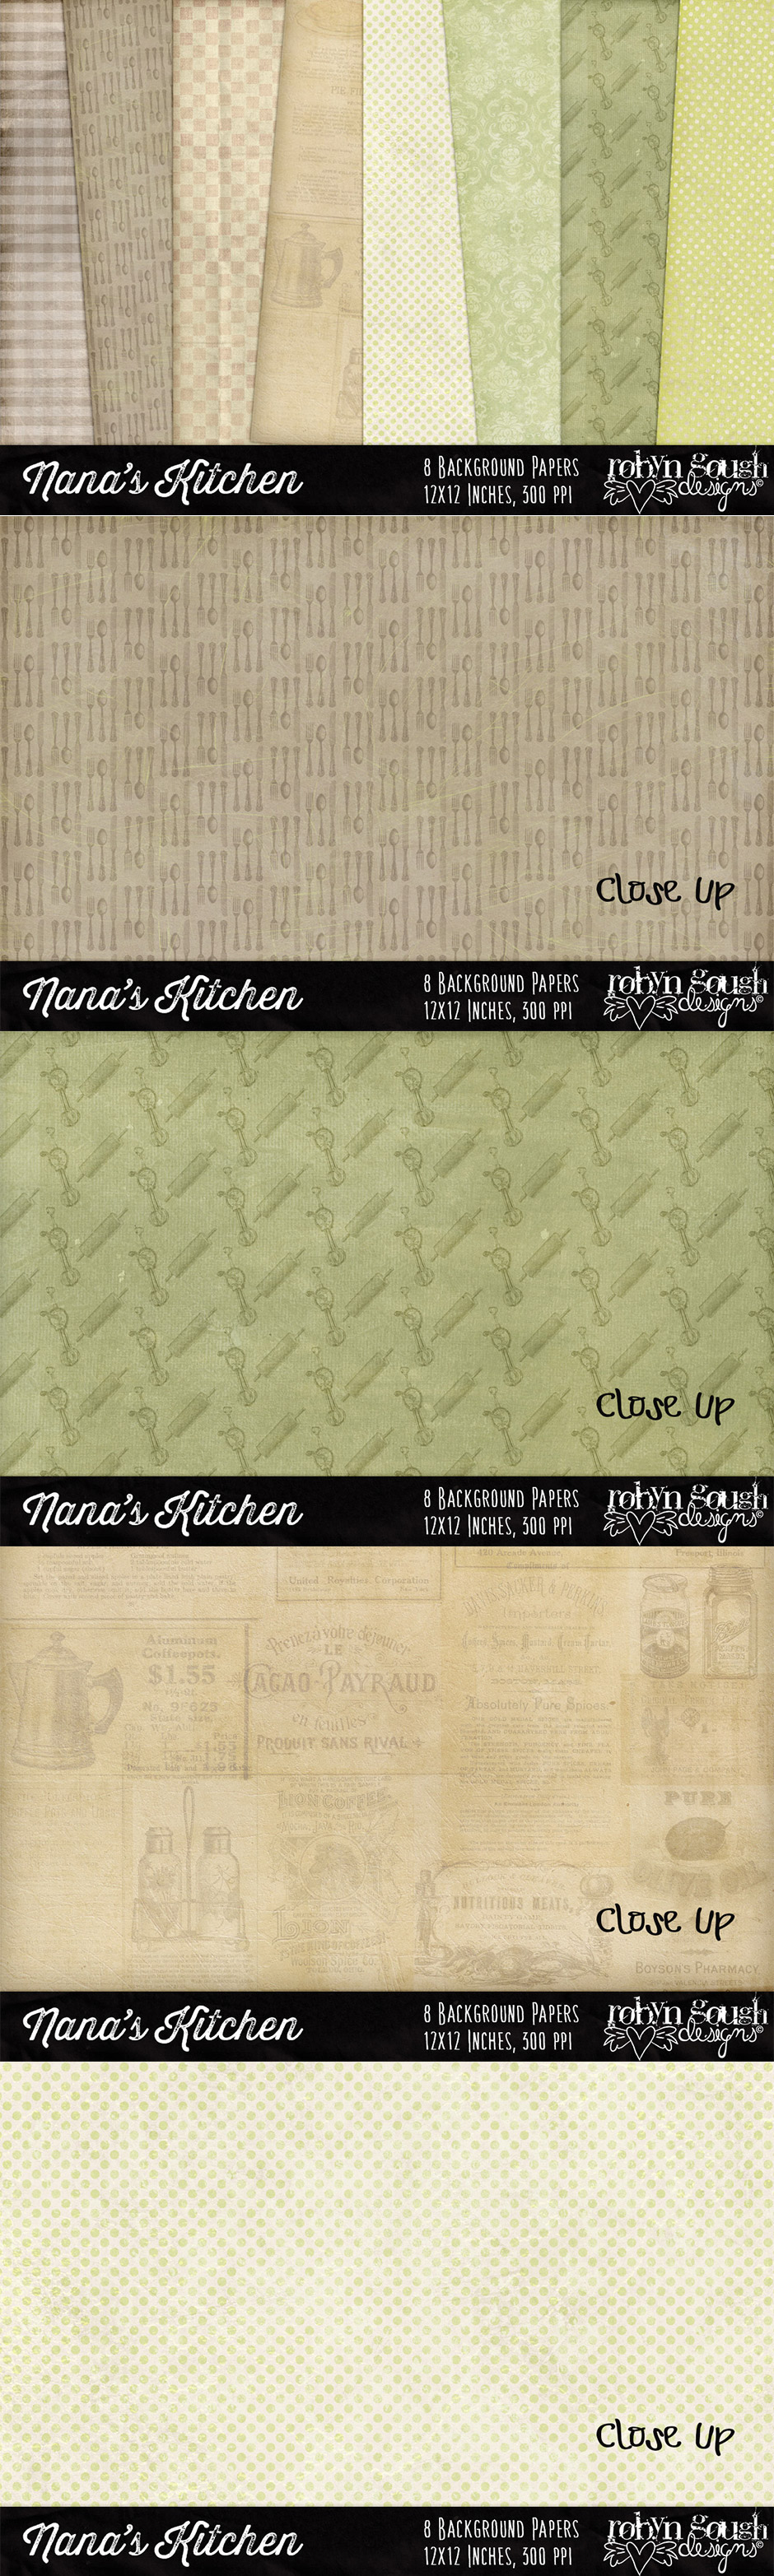 textures Patterns backgrounds effects